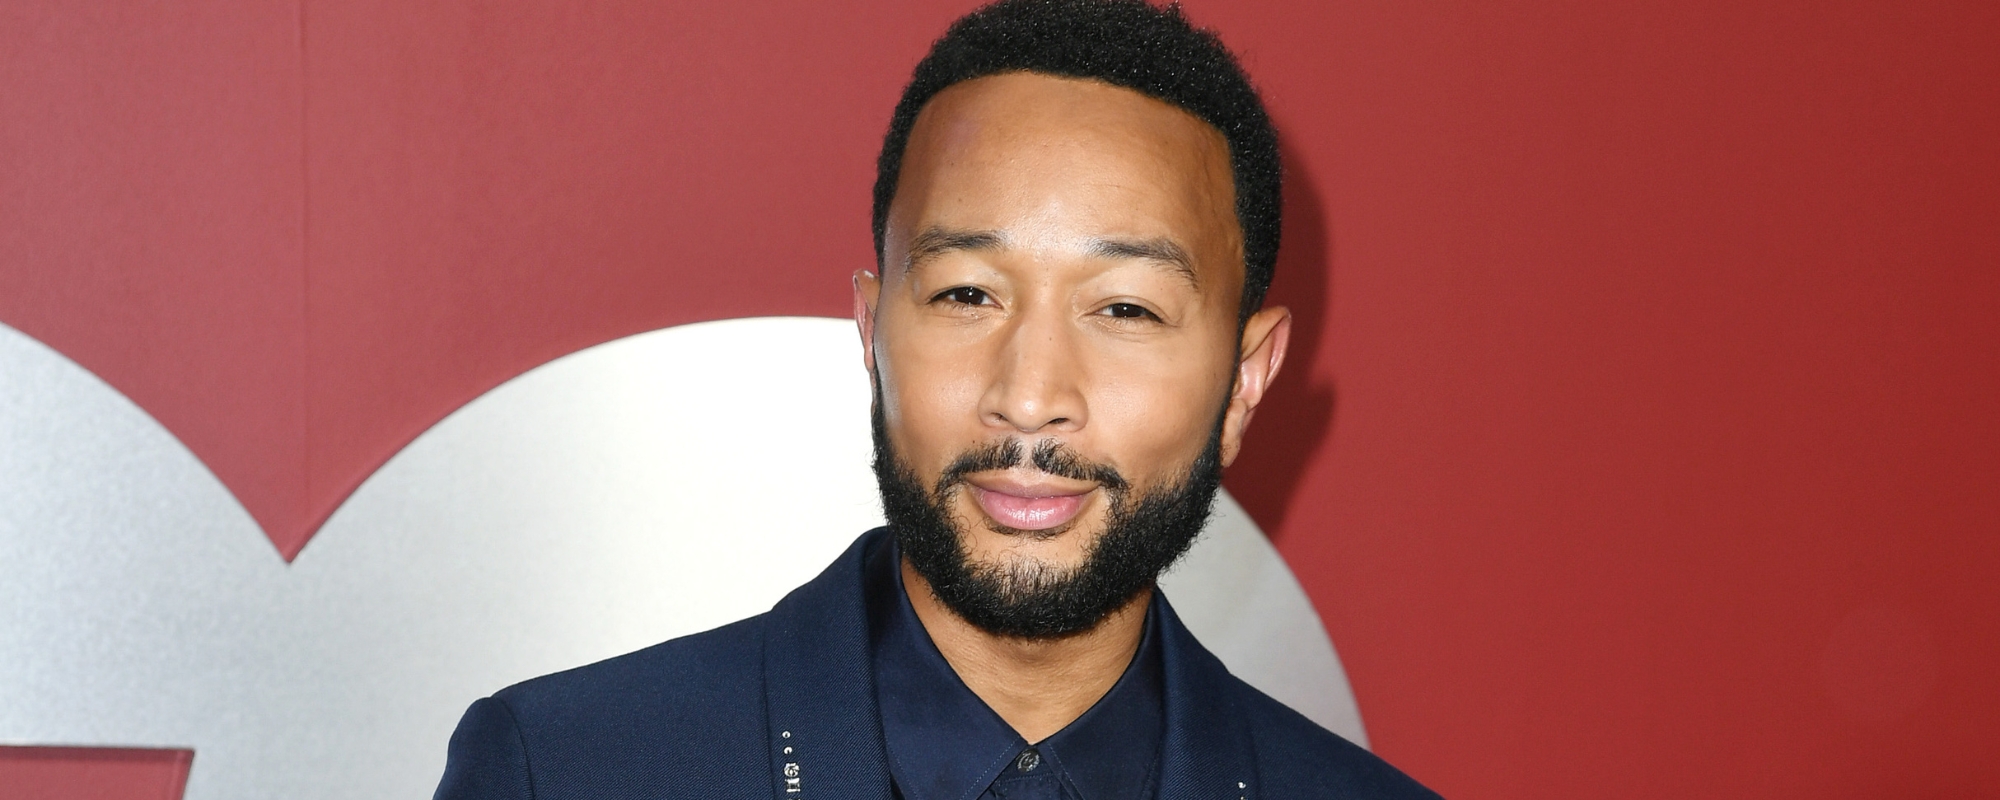 John Legend Delivers Lofty Praise to ‘The Voice’ Standout Mac Royals After Standing Ovation